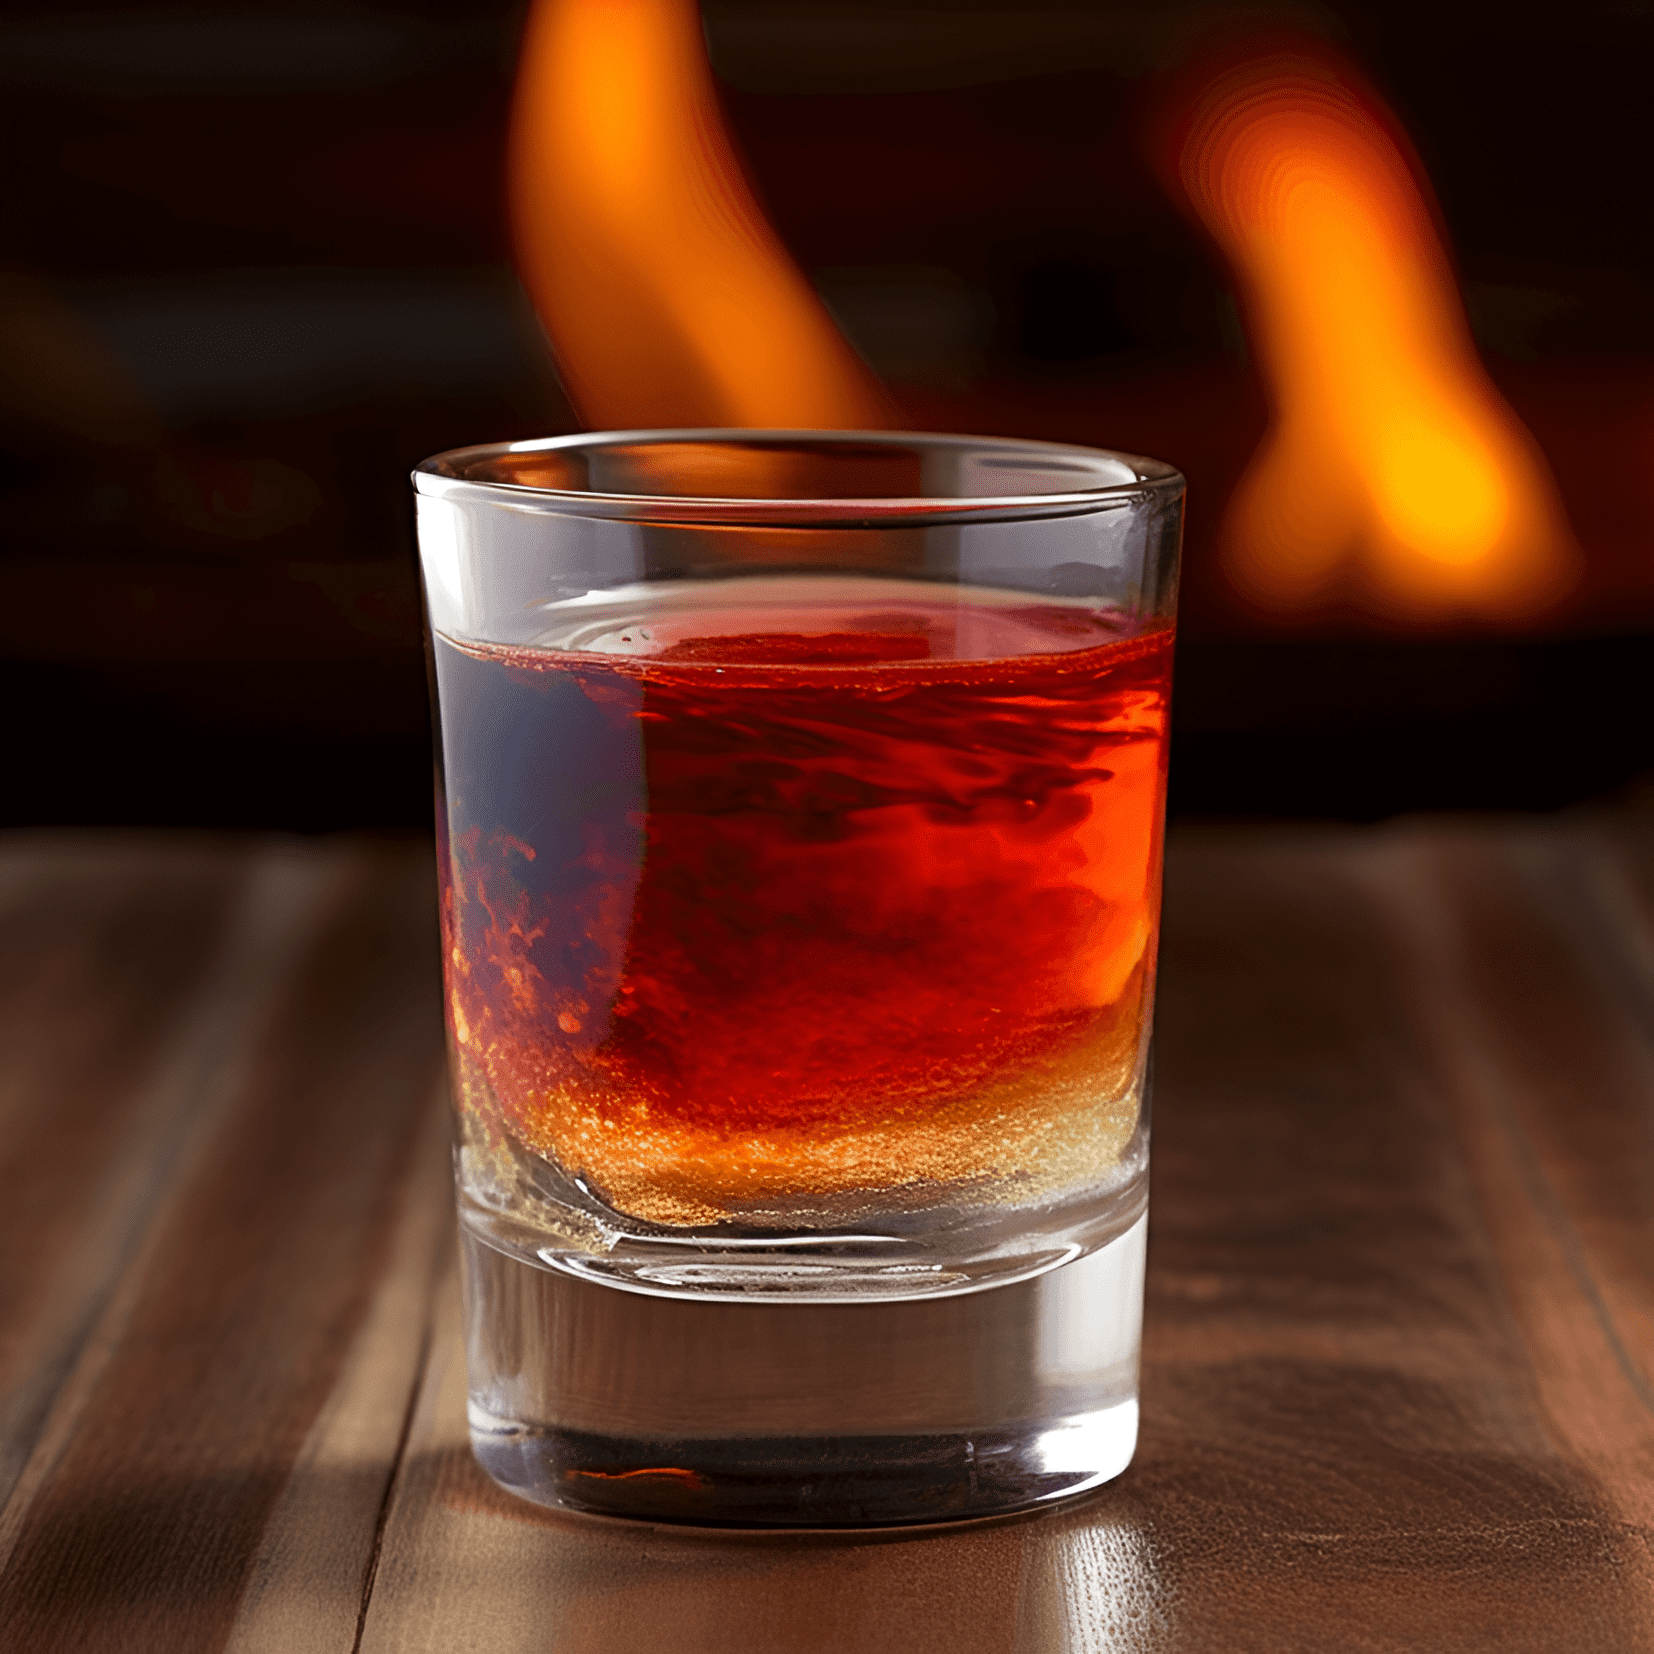 Prairie Fire Cocktail Recipe - The Prairie Fire cocktail has a bold, spicy flavor with a strong kick from the tequila. The hot sauce adds a fiery heat, while the tequila provides a smooth, slightly sweet base. The overall taste is intense, warming, and not for the faint of heart.